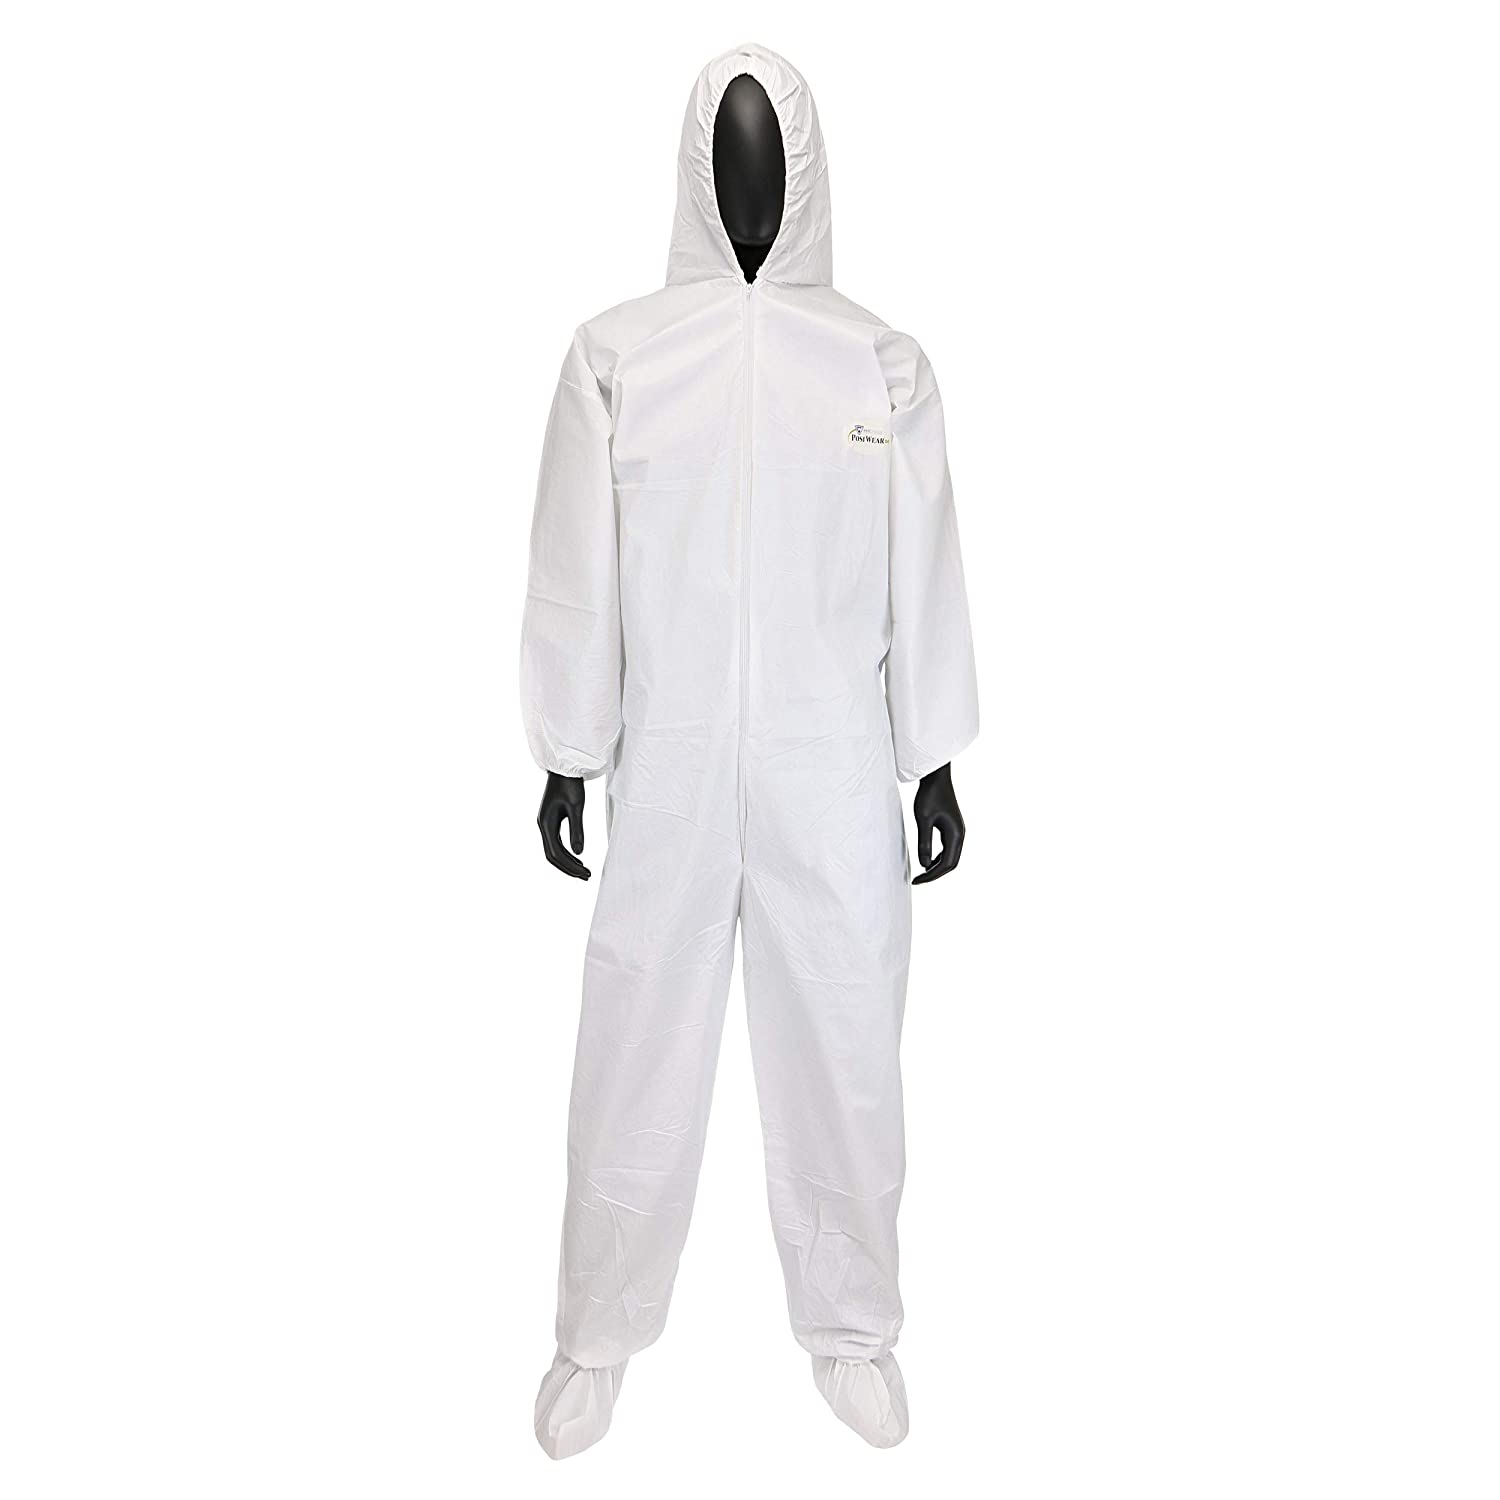 West Chester 3609 Polypropylene PosiWear BA: Breathable Advantage Microporous Coverall – [Pack of 25] Large, Safety Overall with Boots, Attached, Hood Elastic Wrist, Ankle